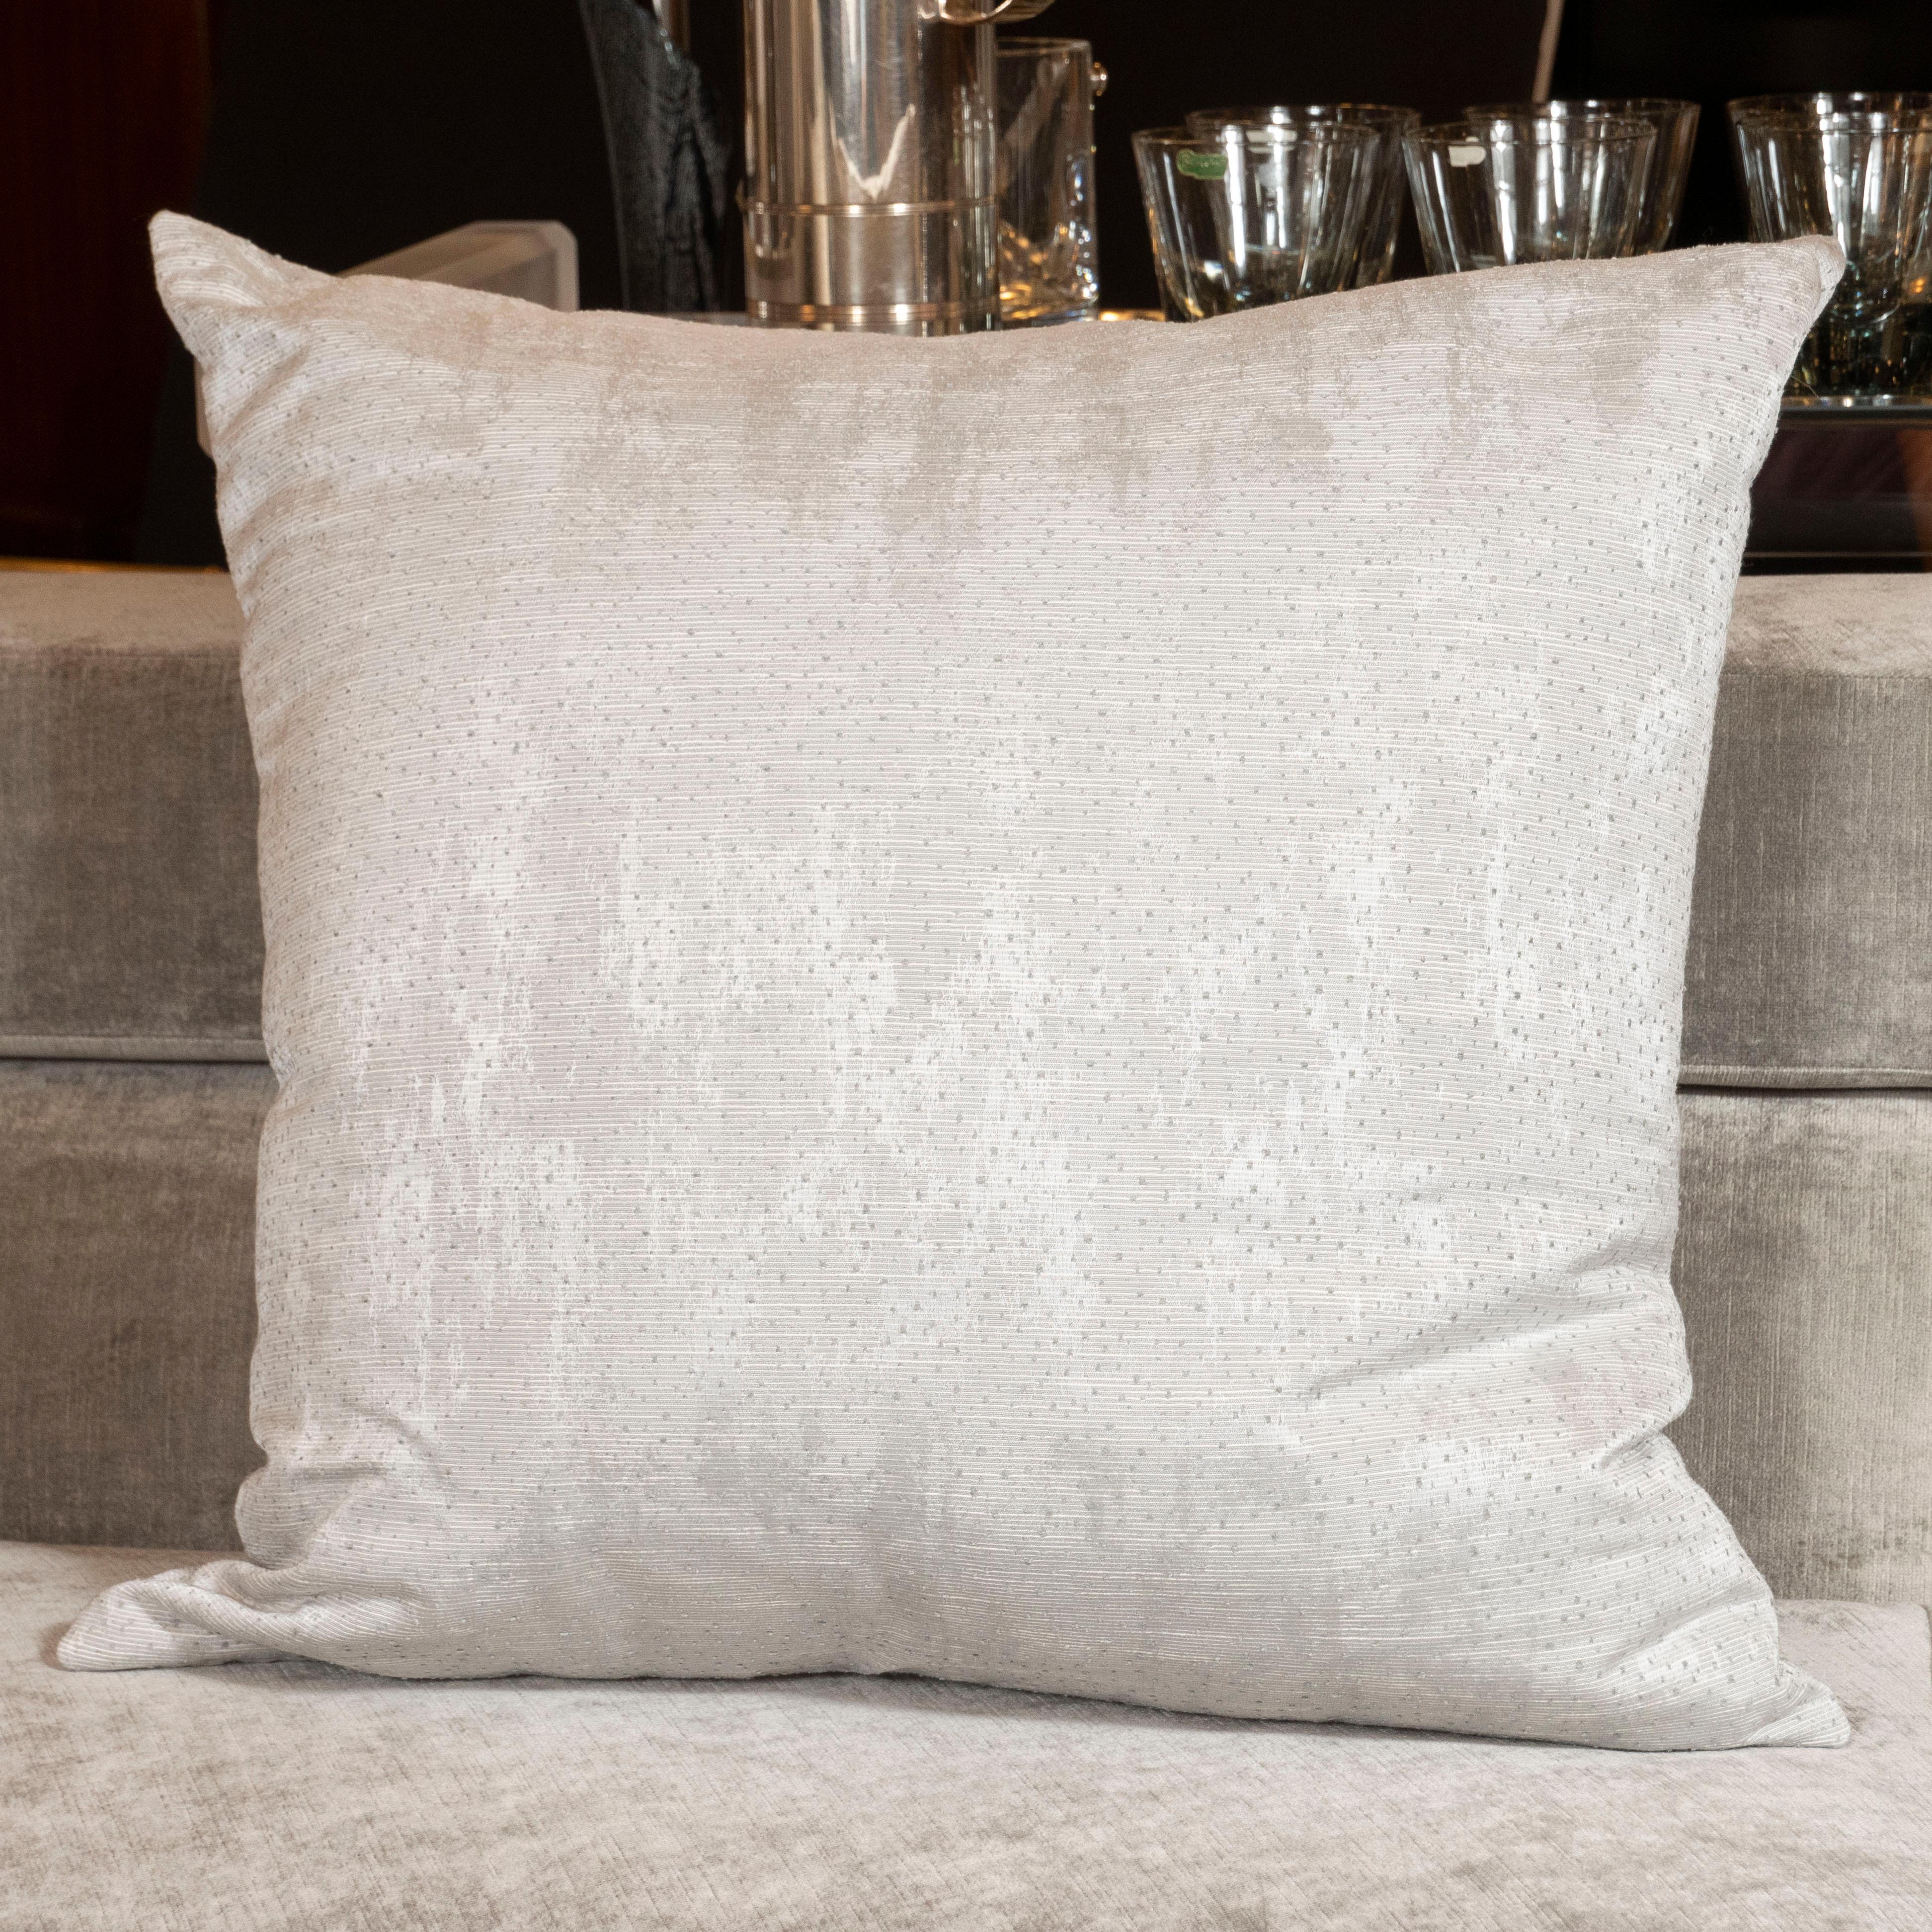 This refined pair of modernist pillows were realized in the United States during the 21st century. They feature an organic striated pattern with miniature dotted tufts in dove gray against a lighter powder gray accent. With their monochromatic